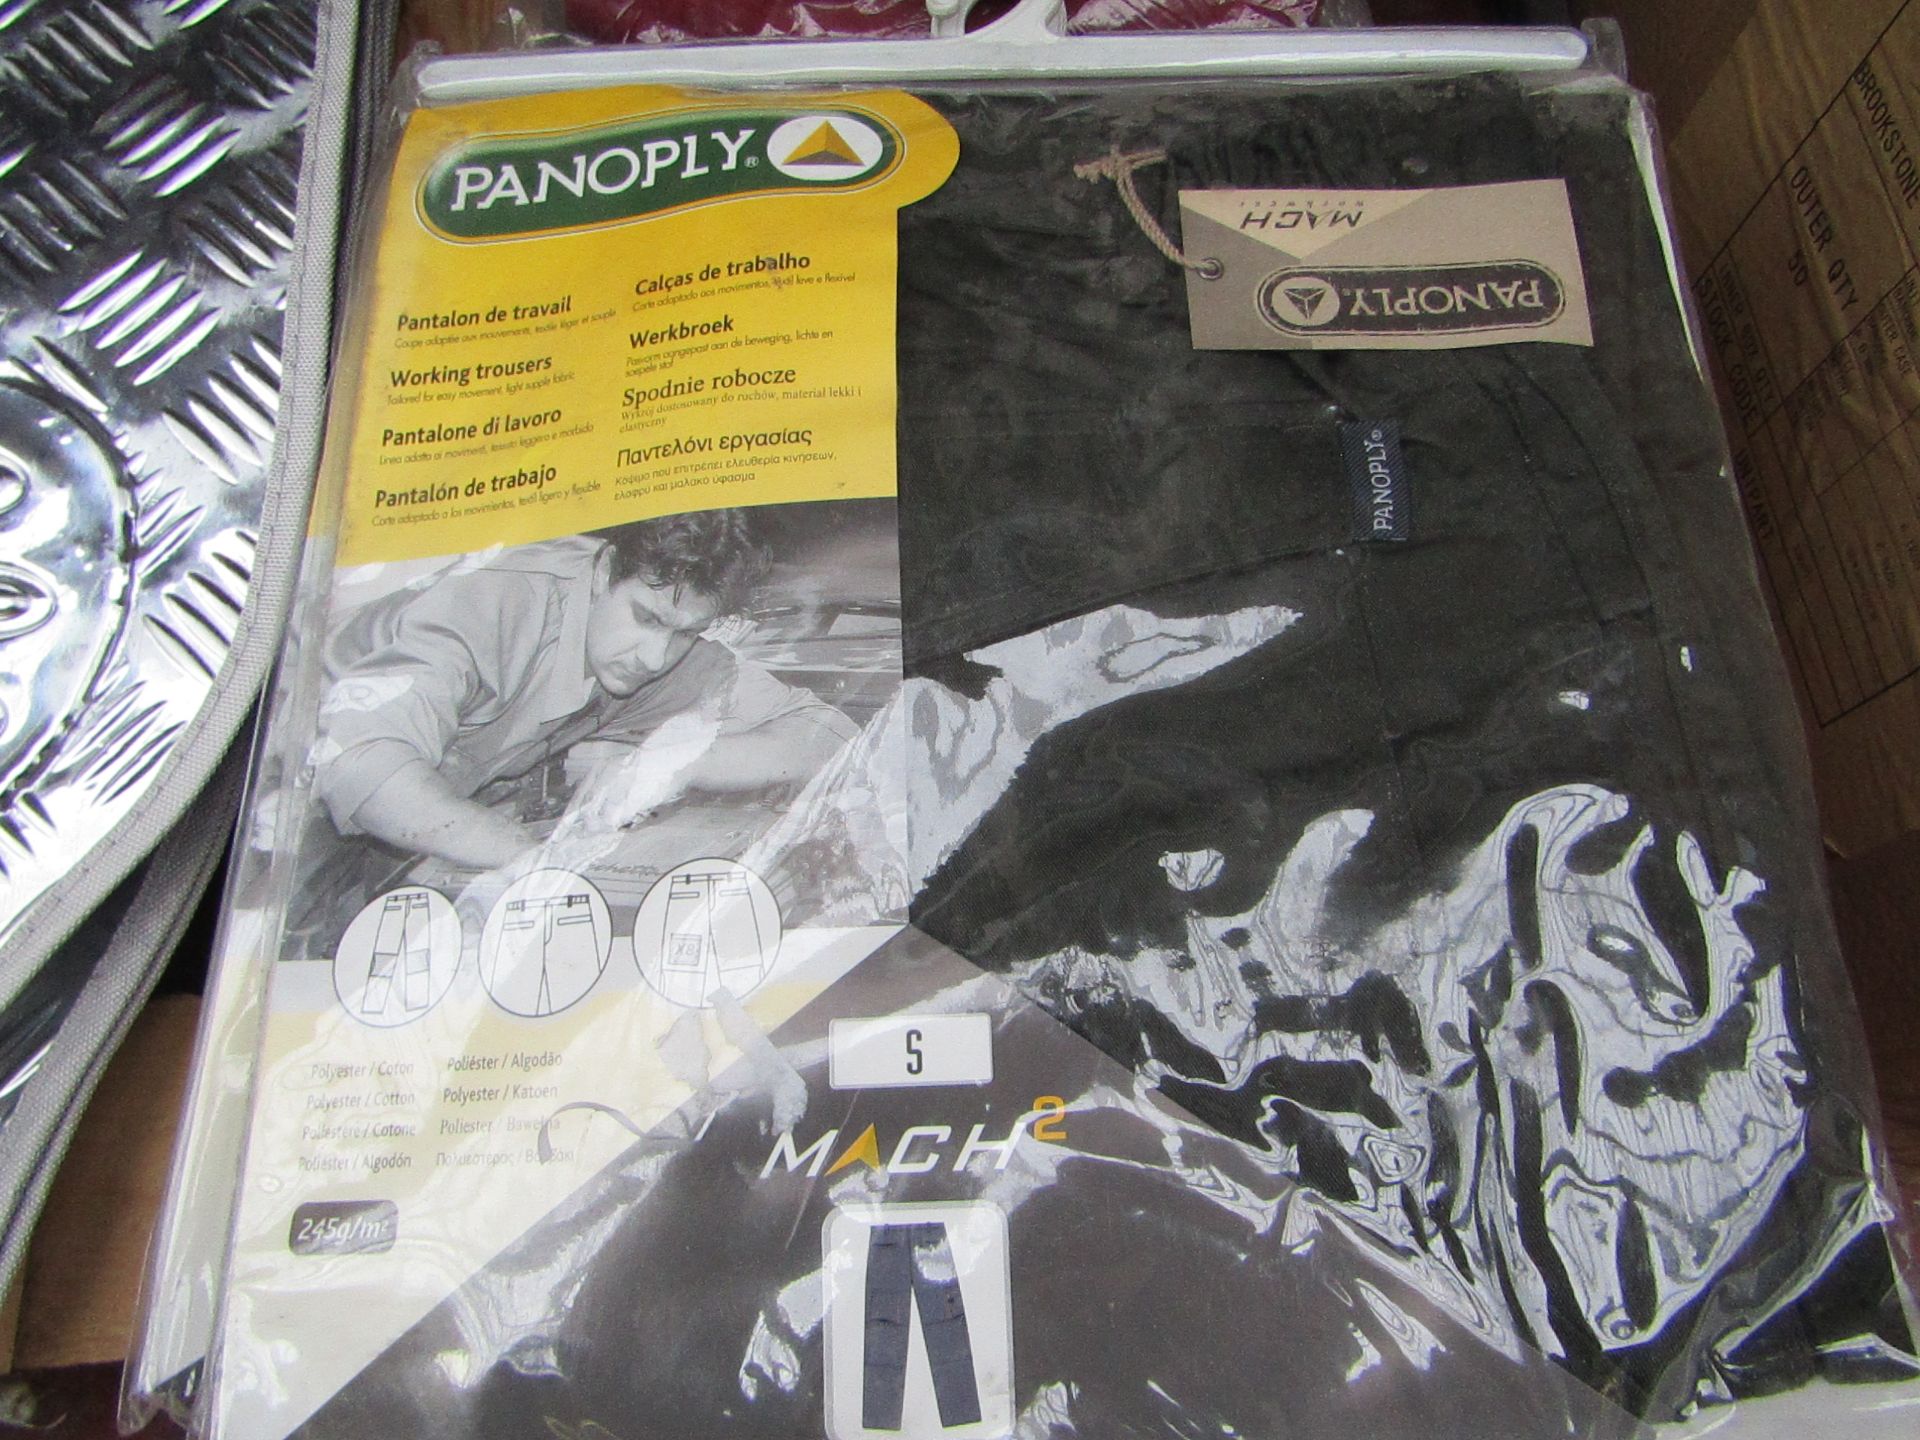 Panoply - Mach 2 Spruce Work Trousers - Size S - Unused & Packaged.